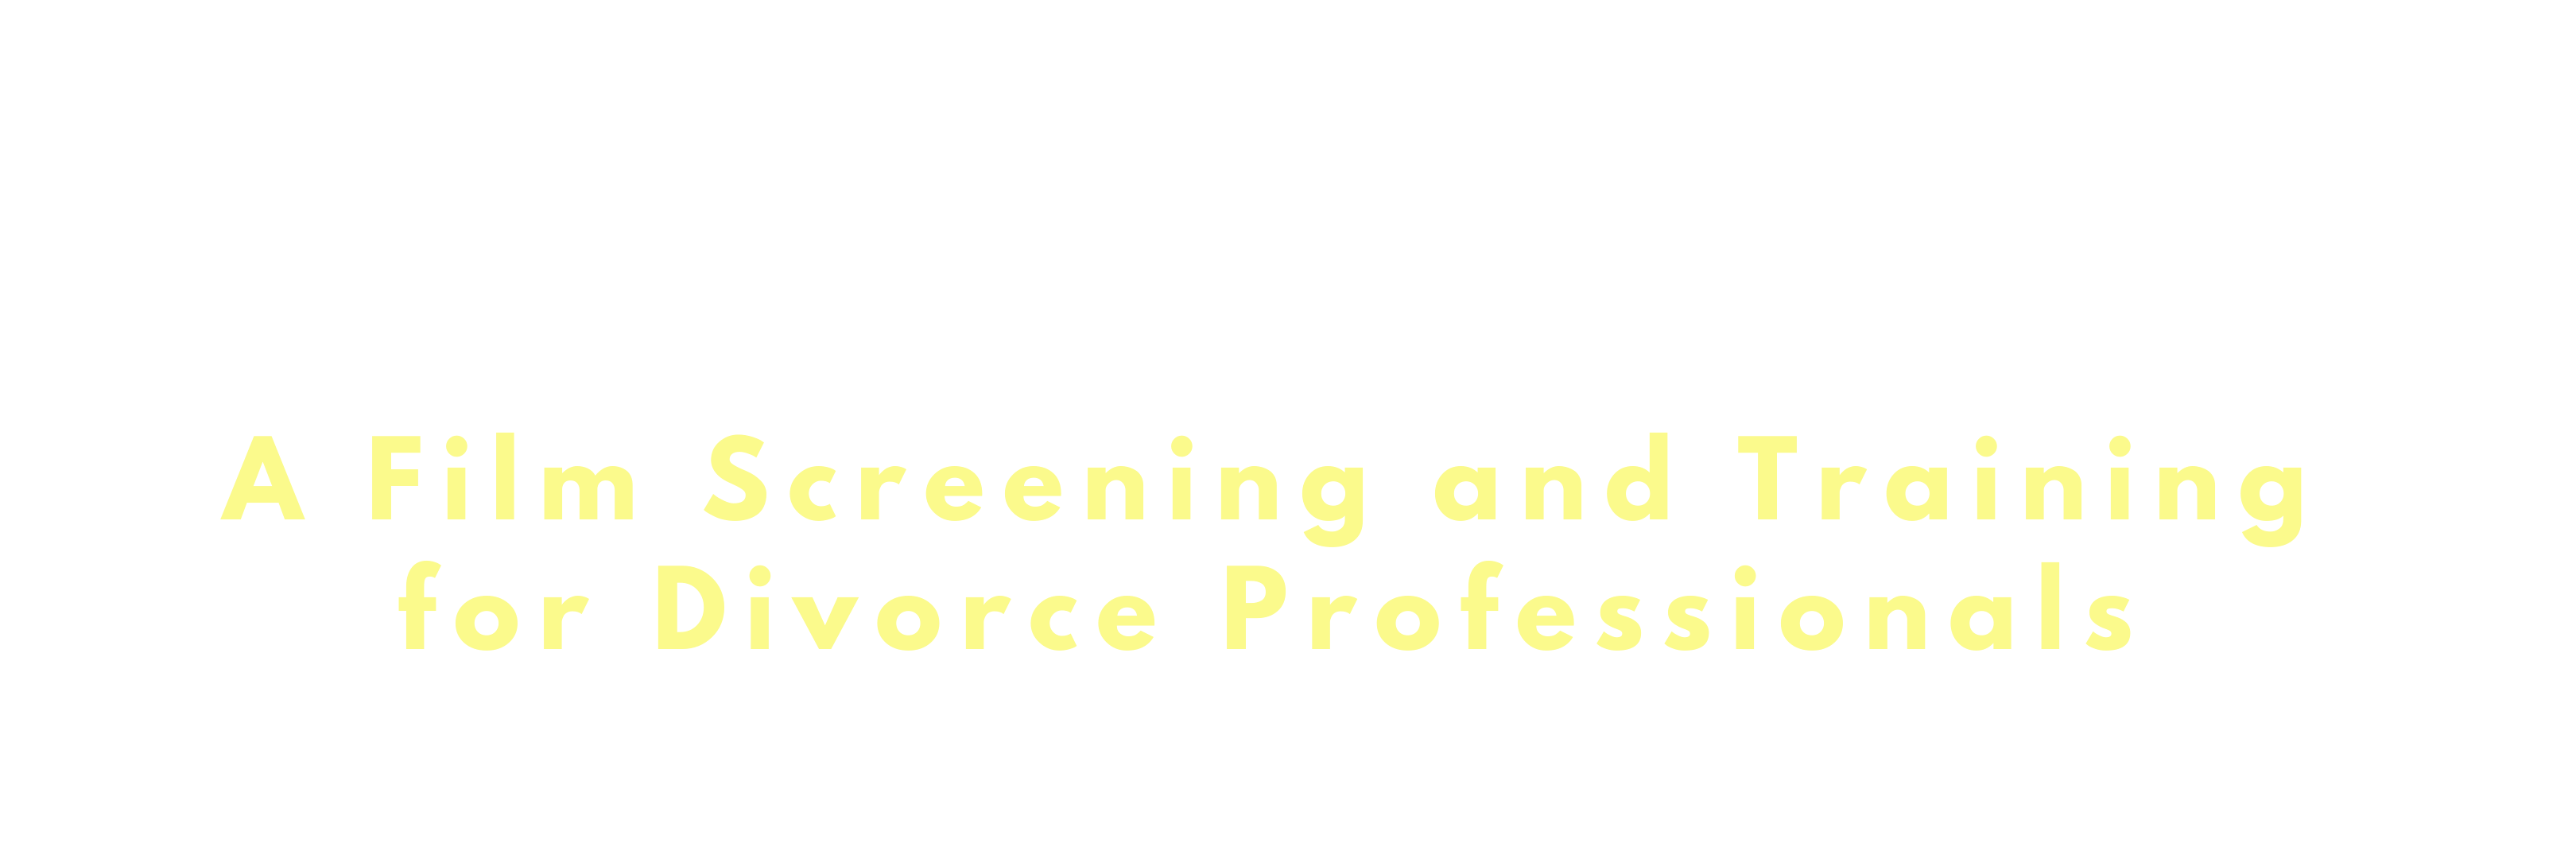 Innovative training opportunity. A film screening and training for divorced professionals